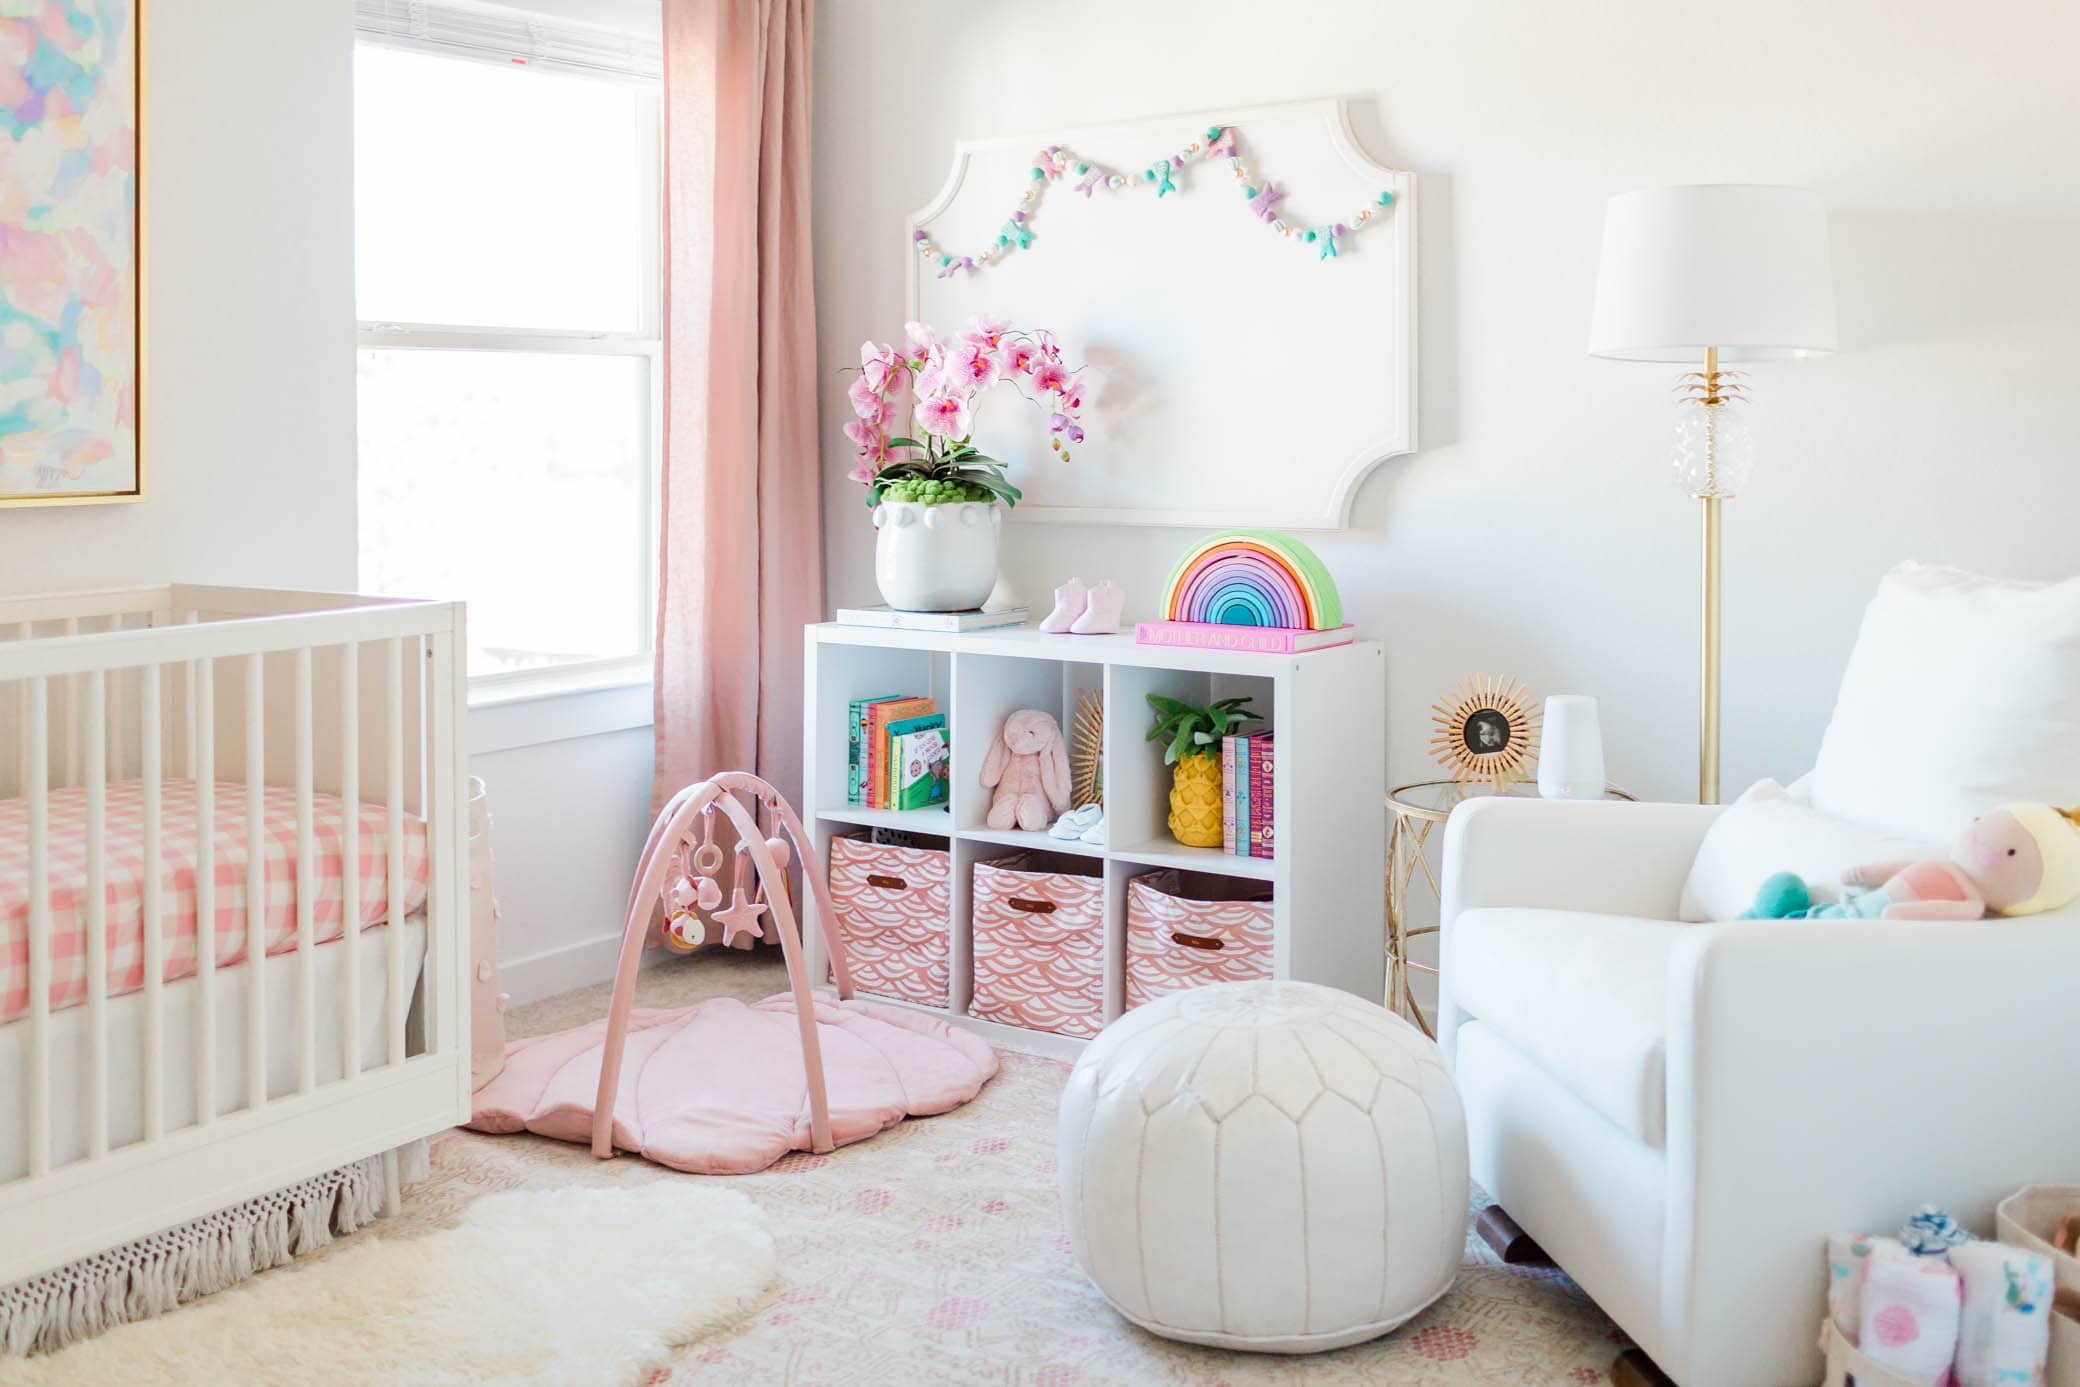 A beautiful baby girl's nursery that is pink and has a palm beach feminine vibe to it.